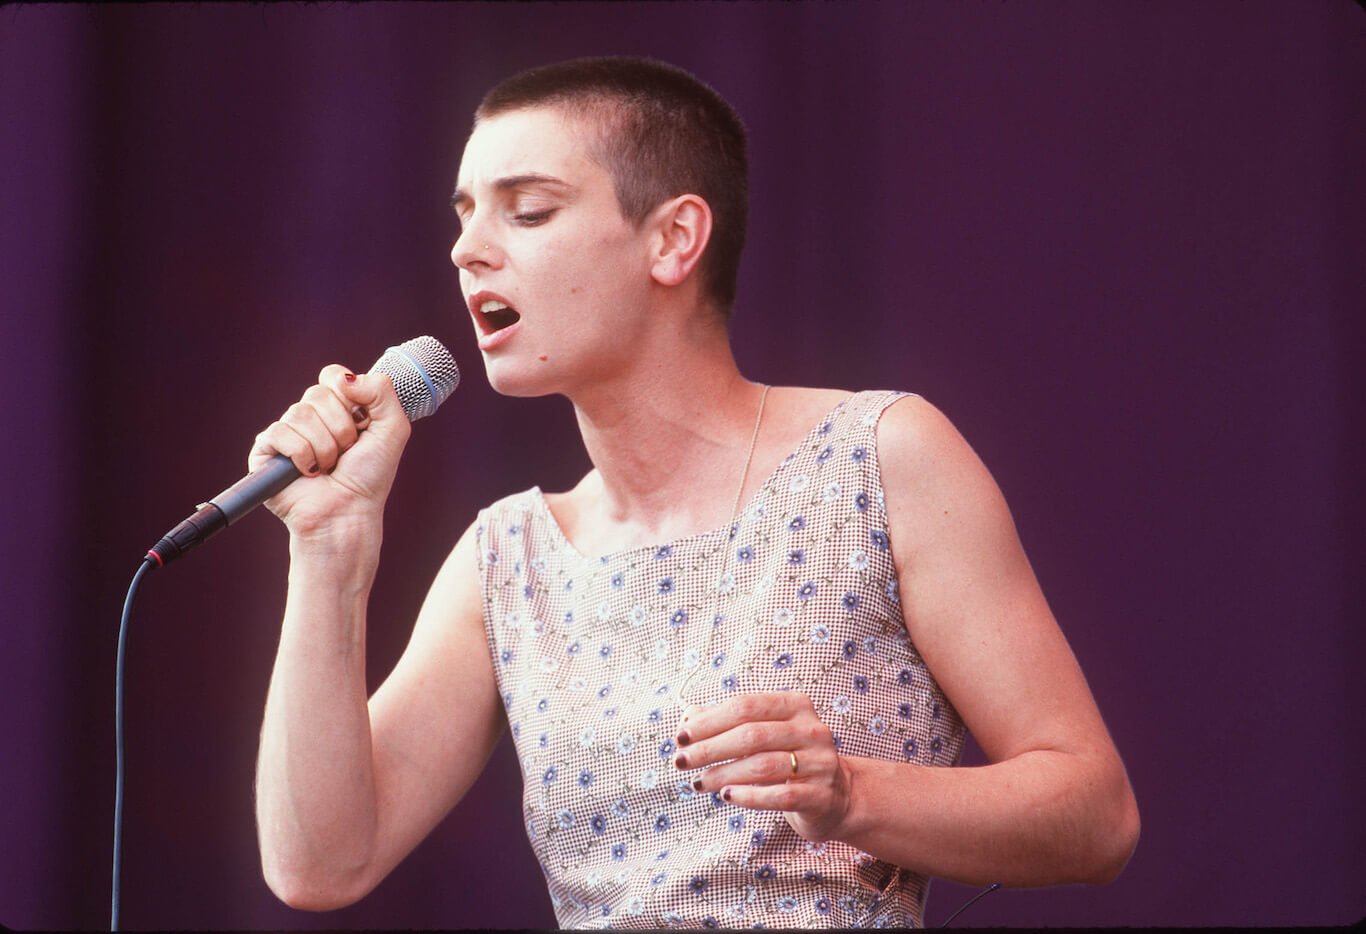 A young Sinead O'Connor singing into a microphone